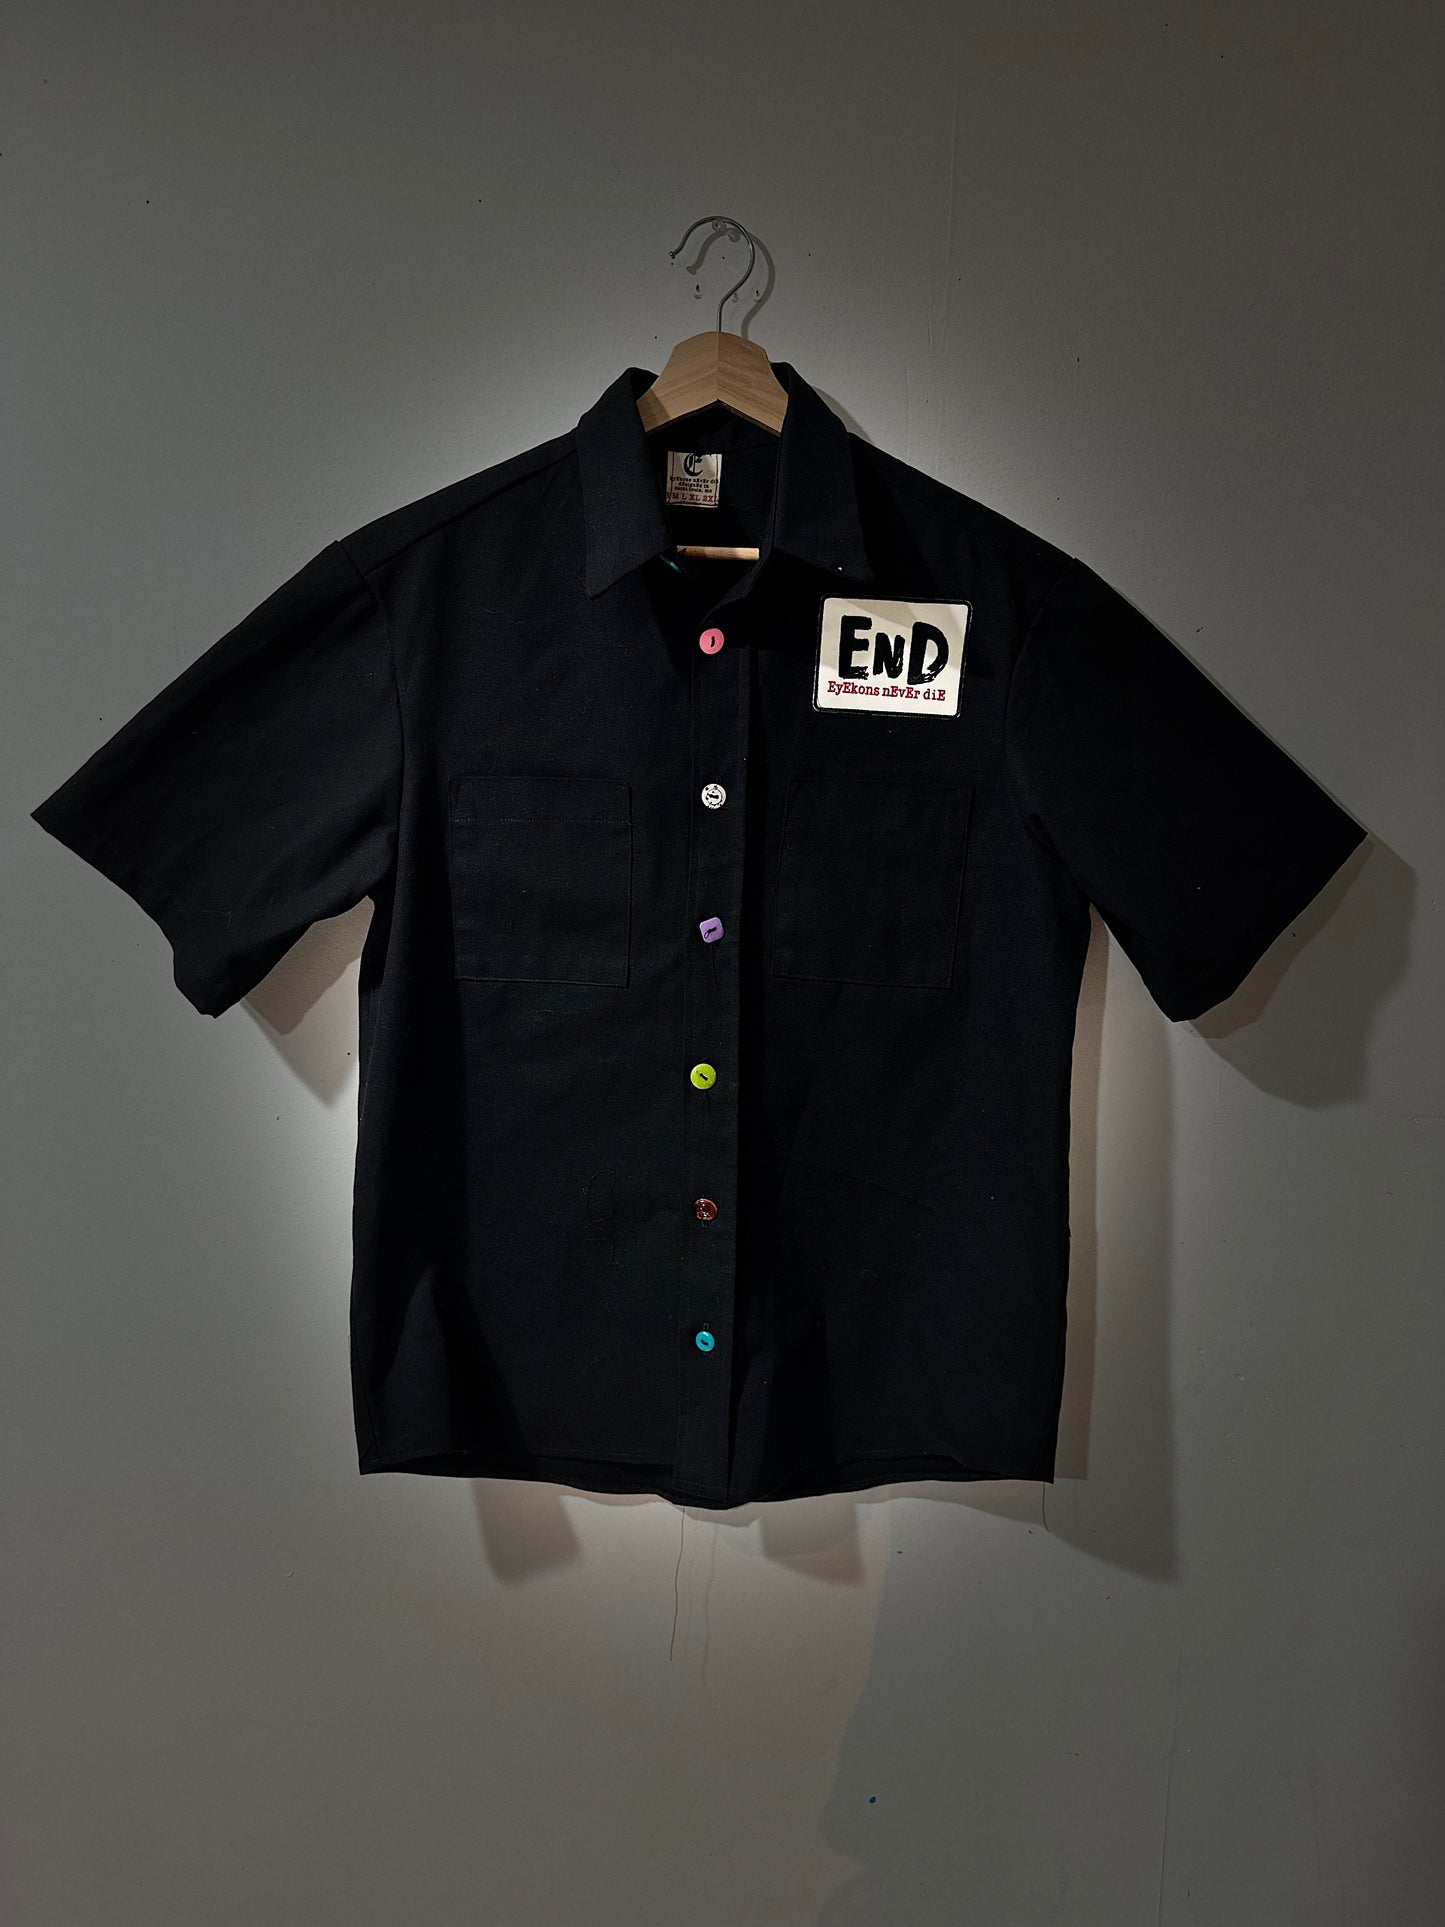 EnD work shirt s/s